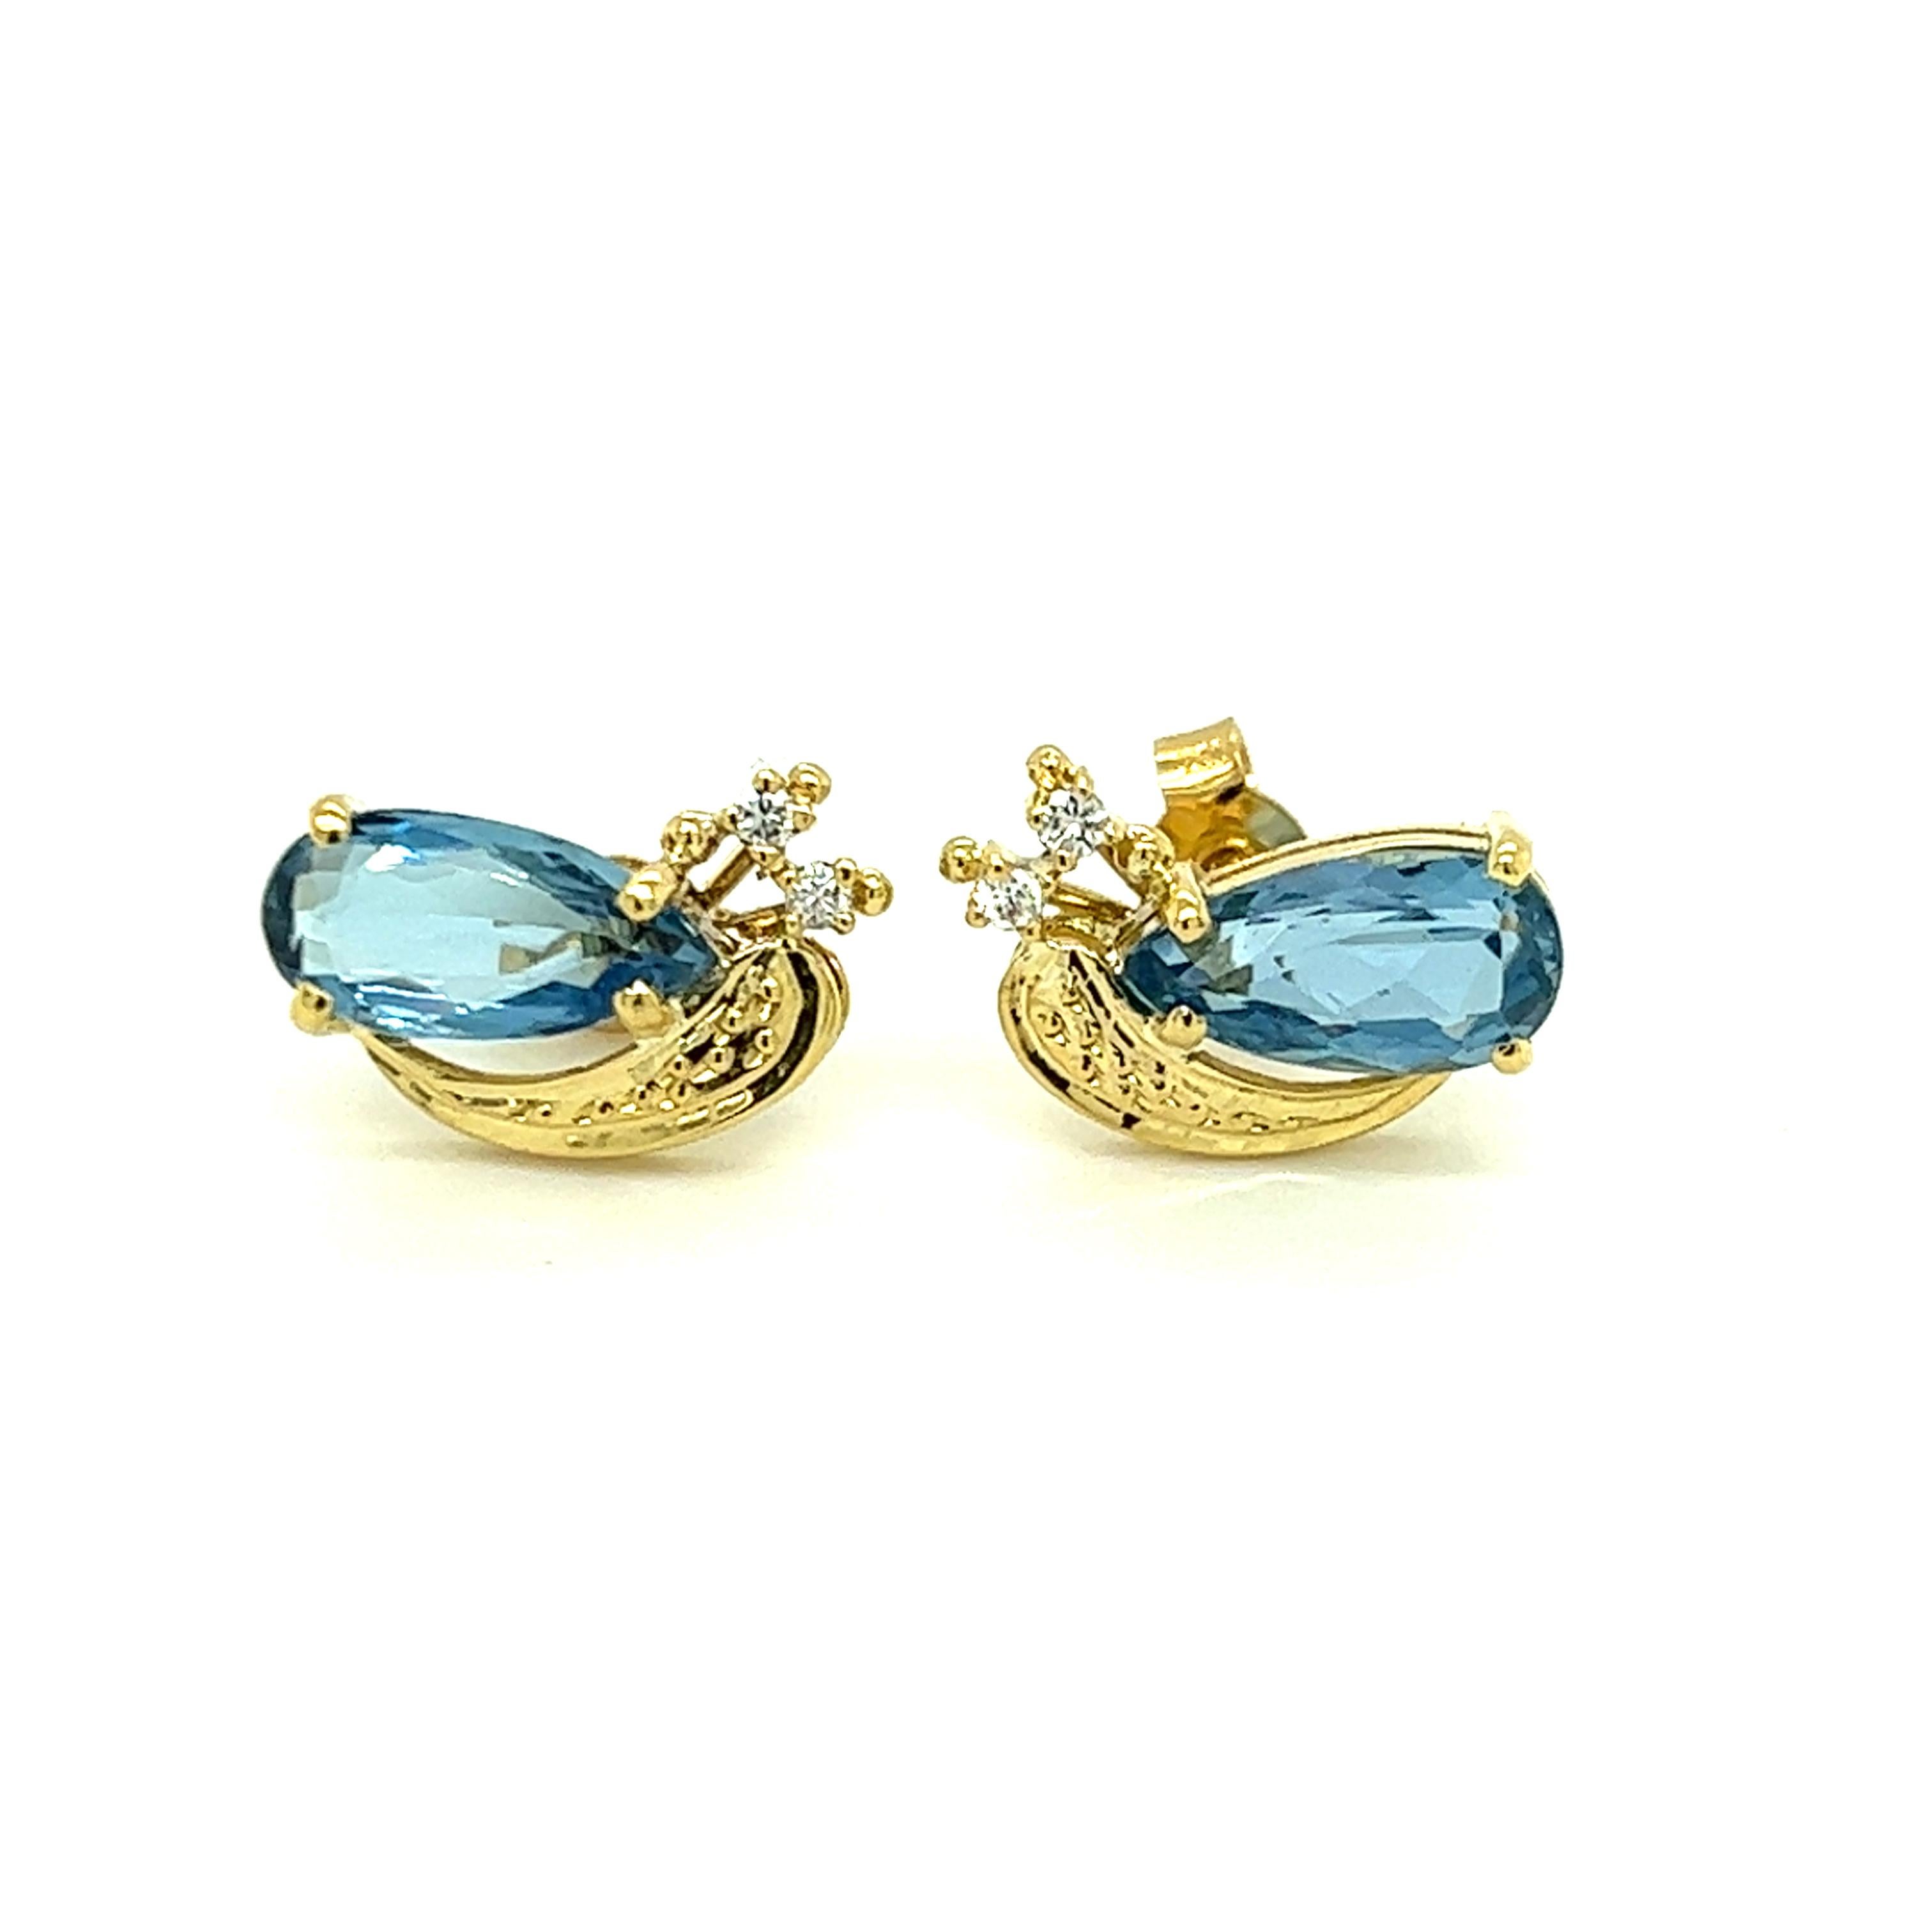 Contemporary H. Stern Aquamarine and Diamond Earrings in 18K Yellow Gold